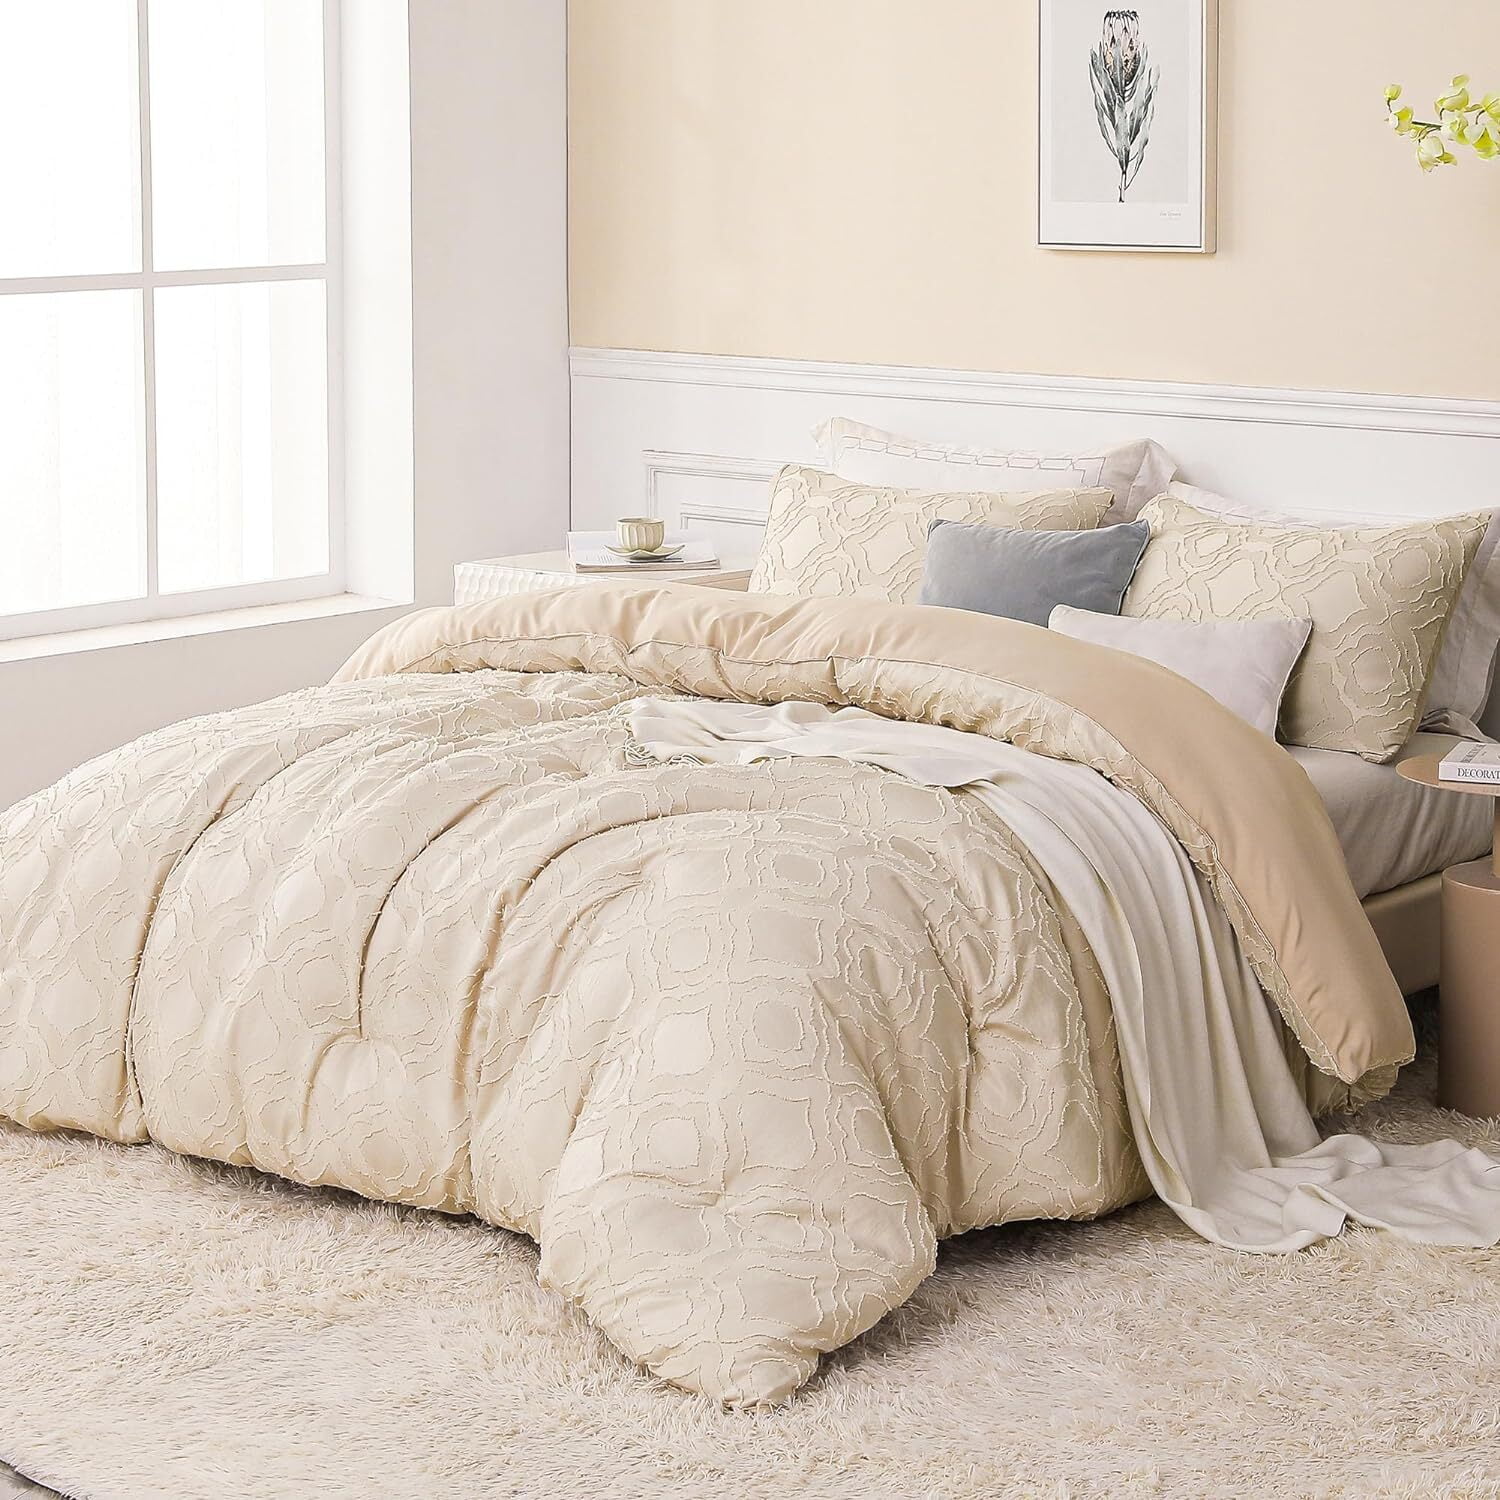 Whale Flotilla 2-Piece Tufted Twin Comforter Set, Soft Fluffy Shabby Chic  Comforter for All Seasons, Farmhouse Boho Duvet Bedding Sets with 1 Pillow  Sham, 68x90, White 